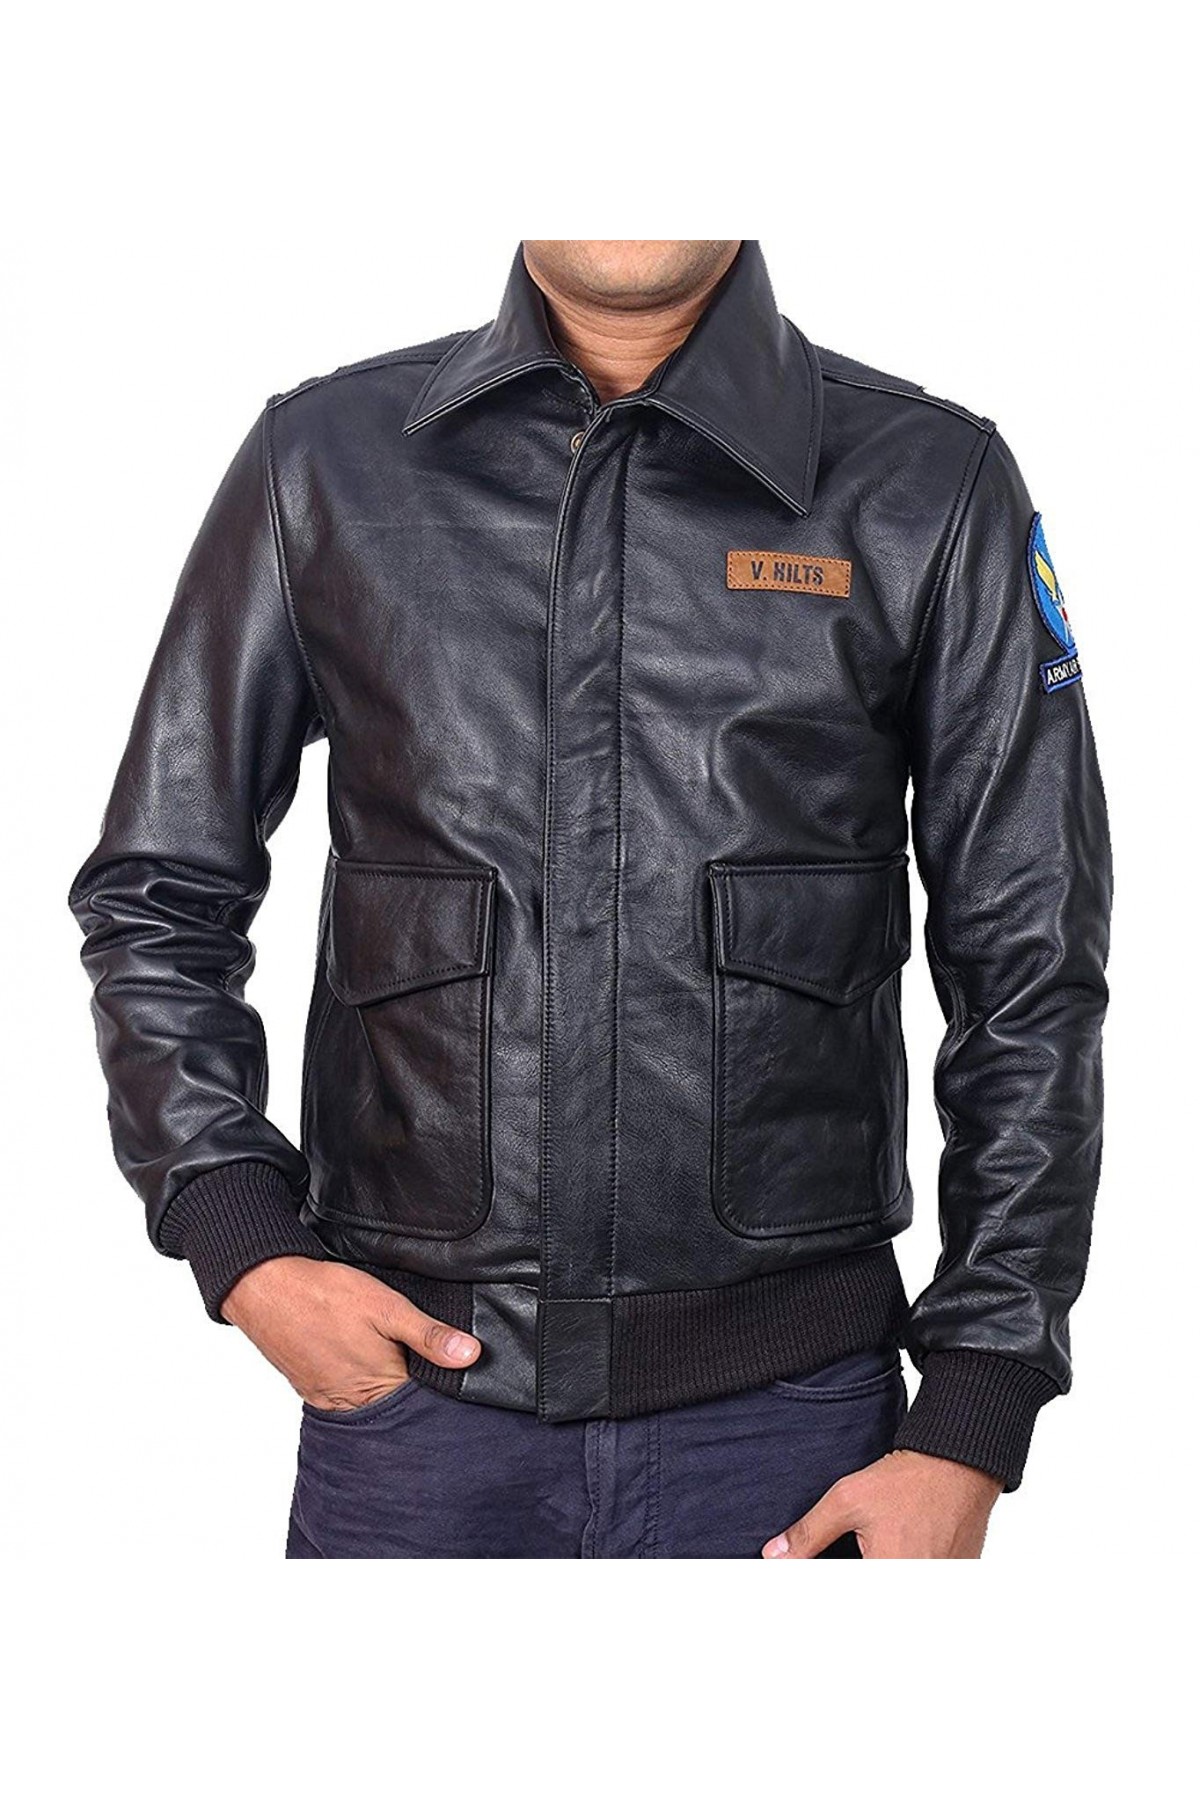 The Great Escape Steve McQueen Bomber Leather Jacket